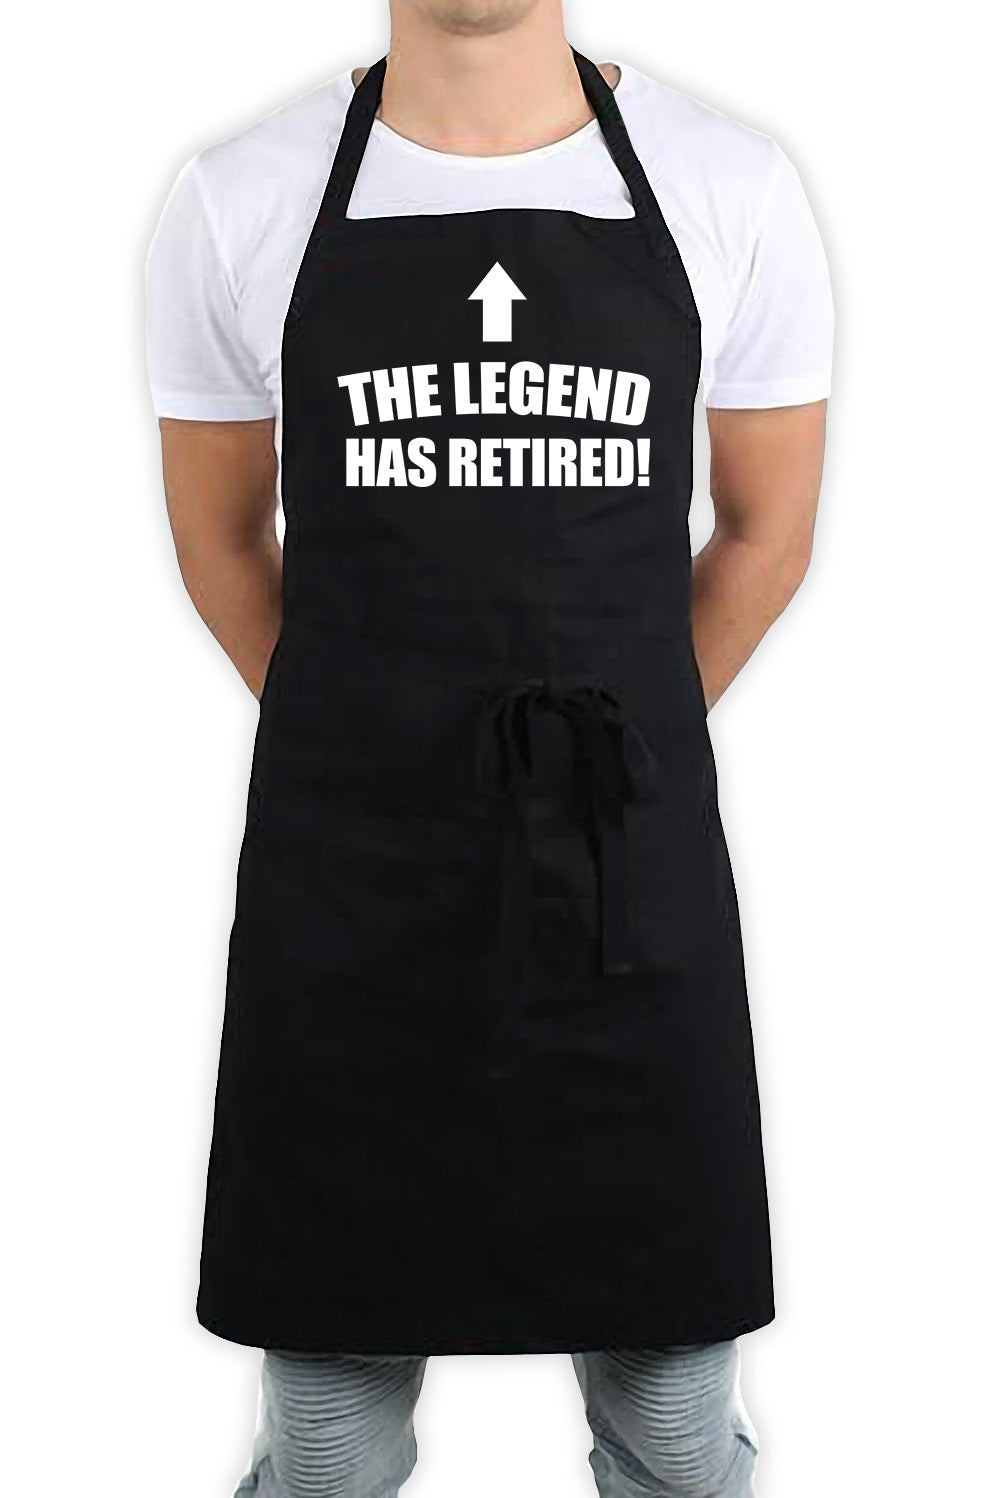 The Legend Has Retired Funny Kitchen BBQ Apron Black